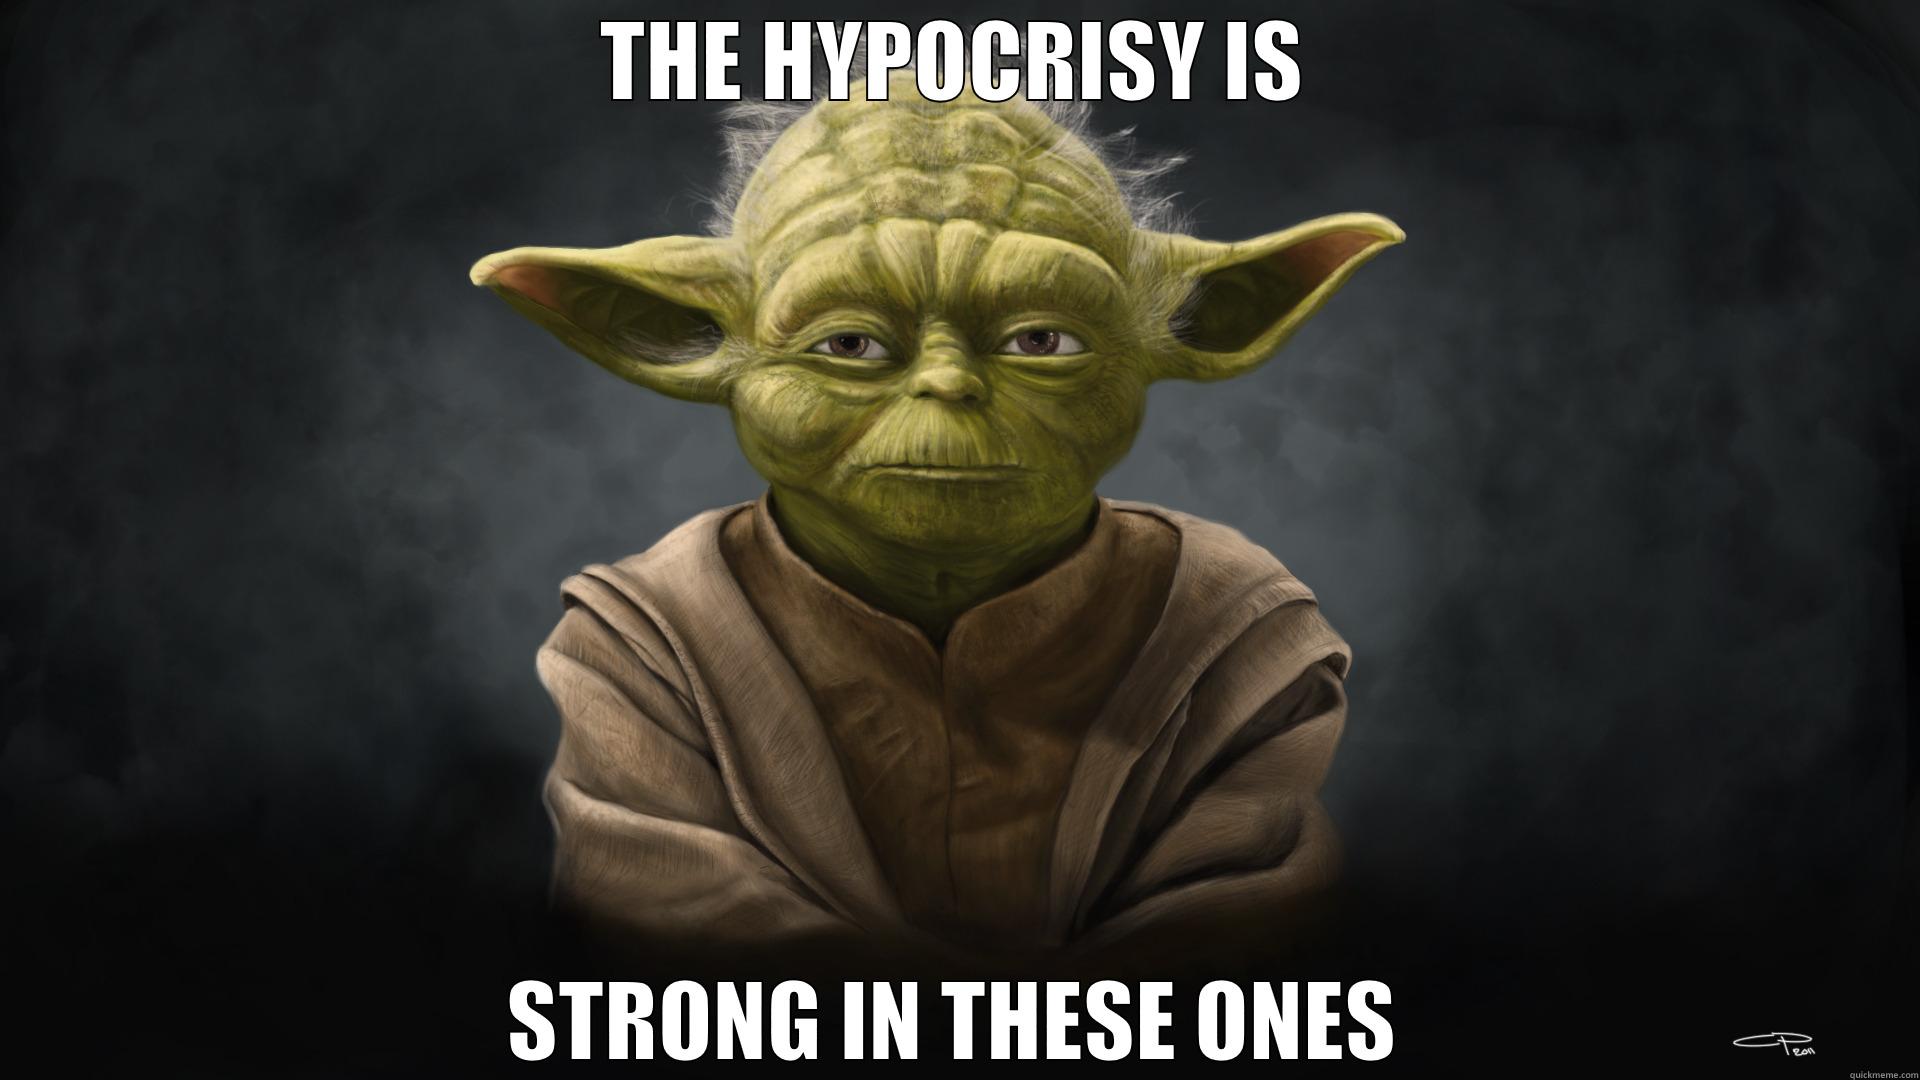 STAR WARS GANGSTAR - THE HYPOCRISY IS STRONG IN THESE ONES Misc